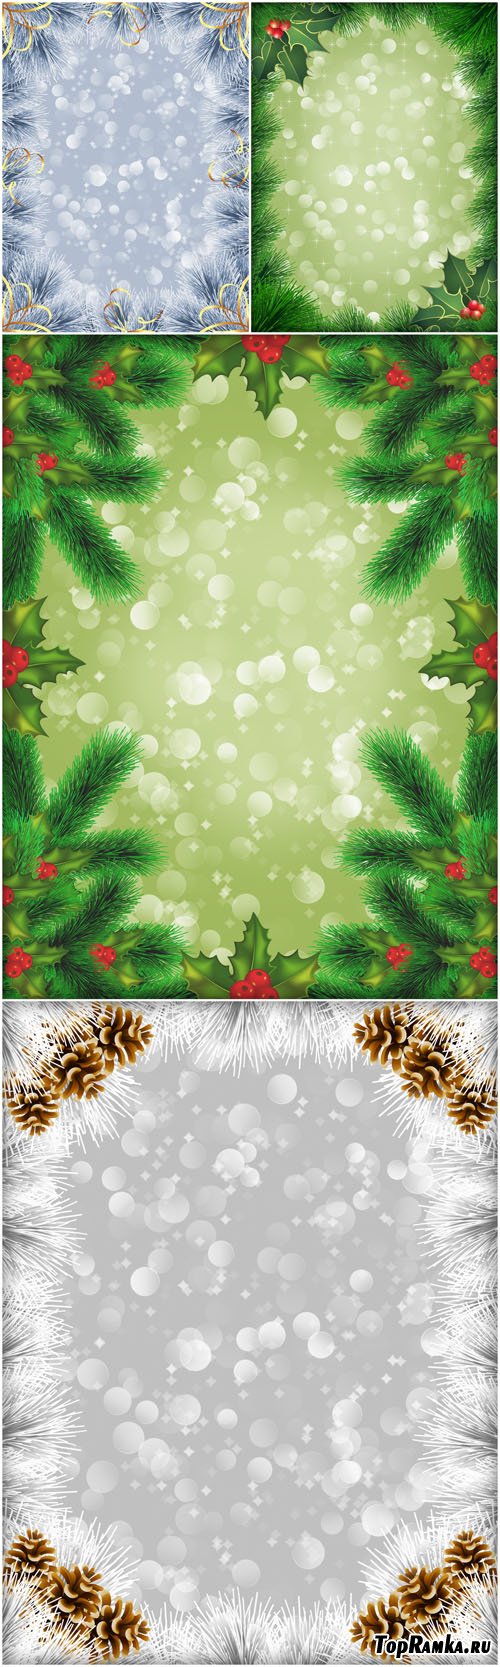 New Year backgrounds with frames New!